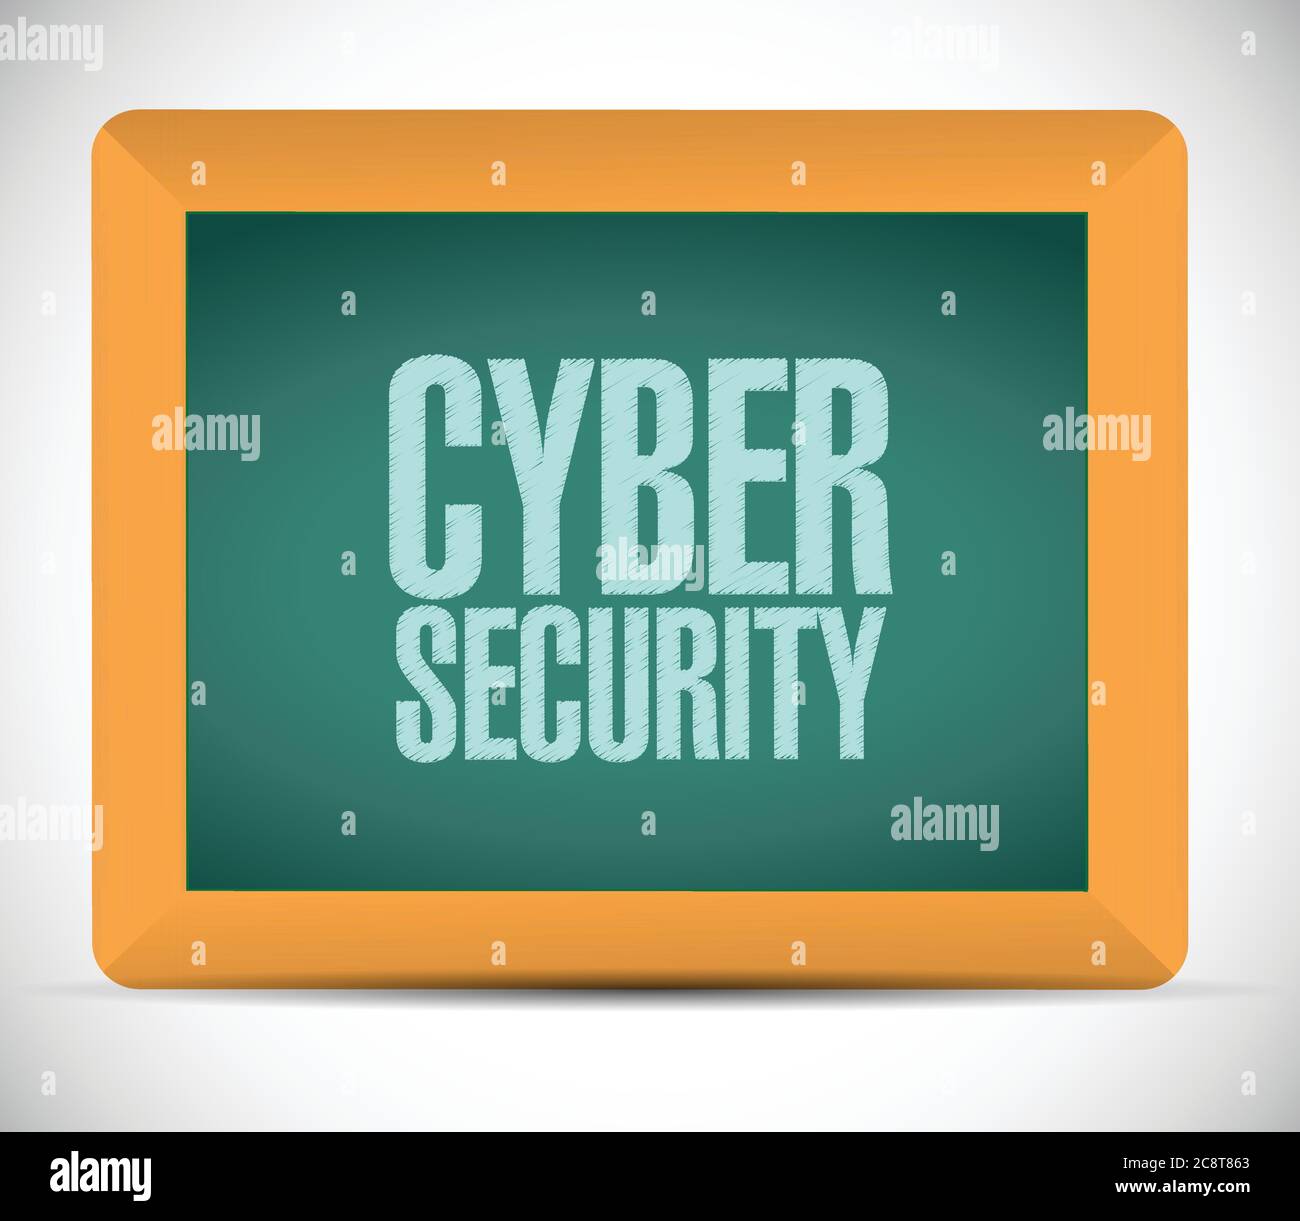 Cyber security sign message illustration design over a white background Stock Vector